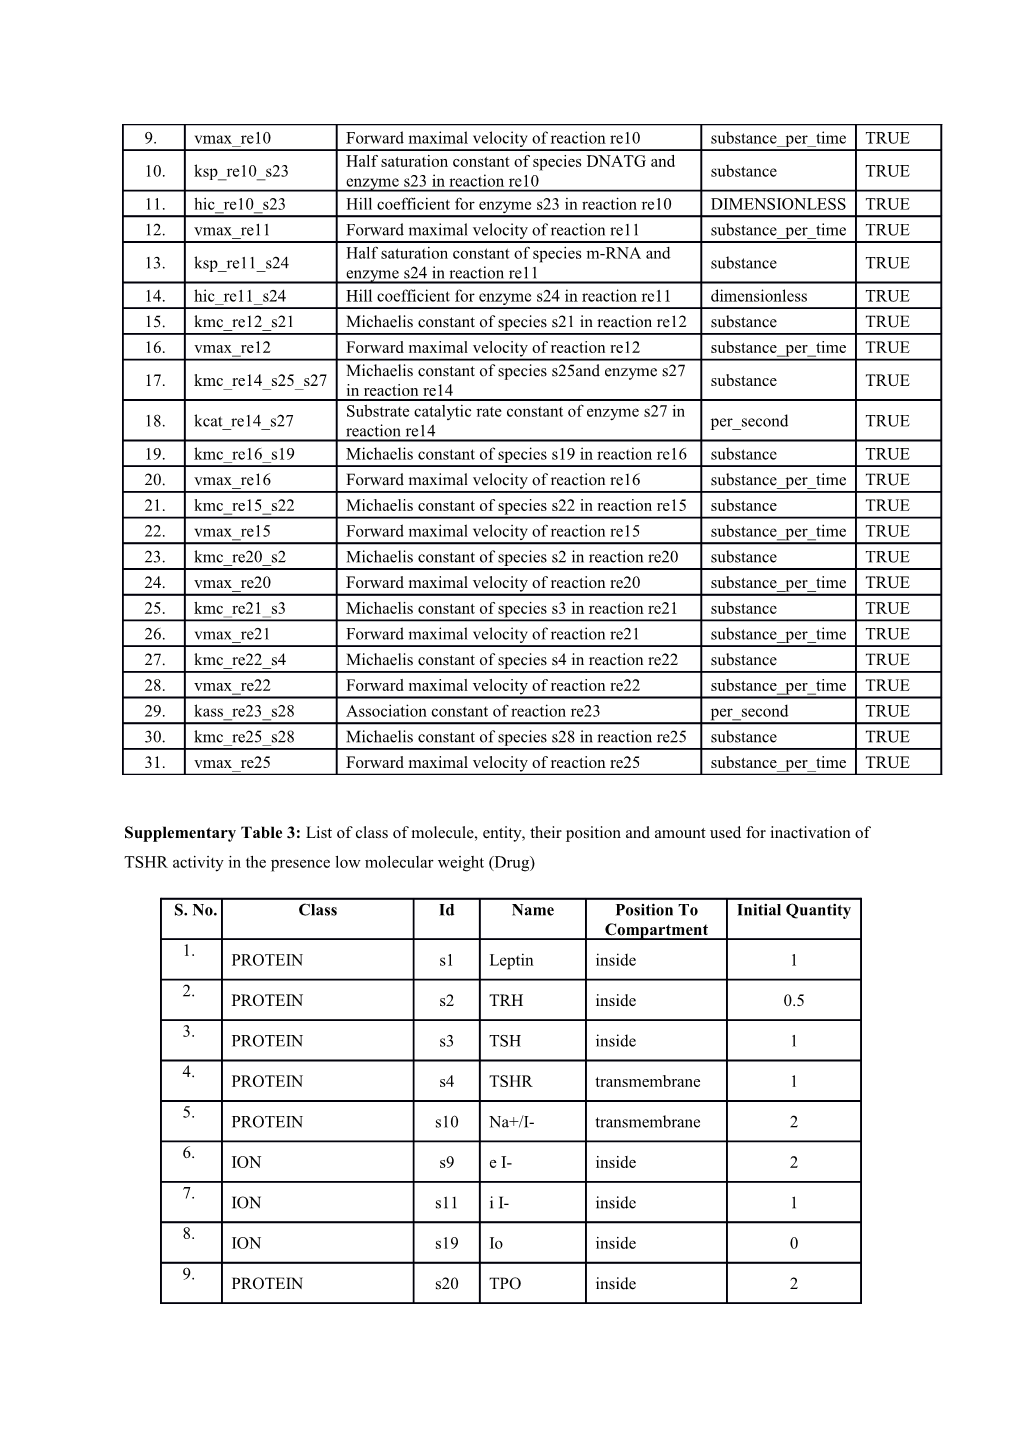 Supplementary Table1: List of Class of Molecule, Entity, Their Position and Amount Used